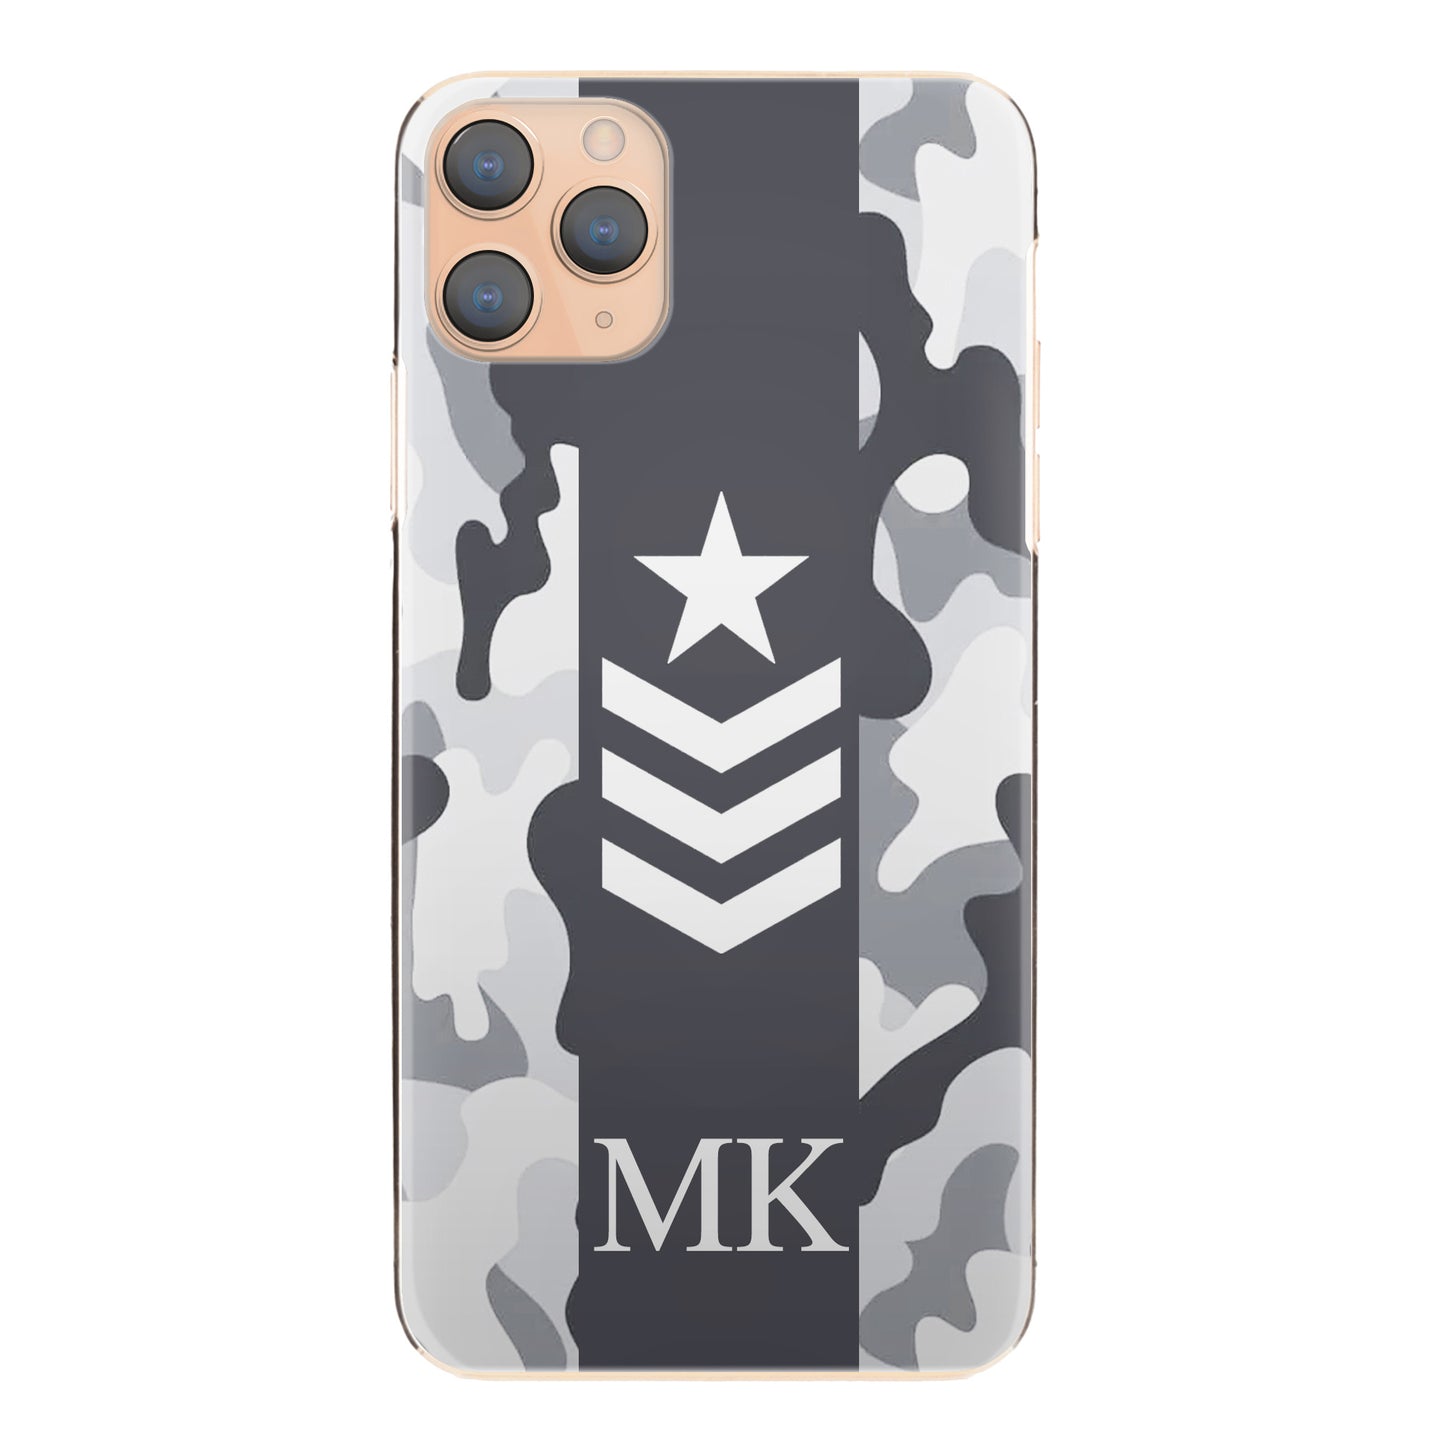 Personalised LG Phone Hard Case with Initials and Army Rank on Artic Camo